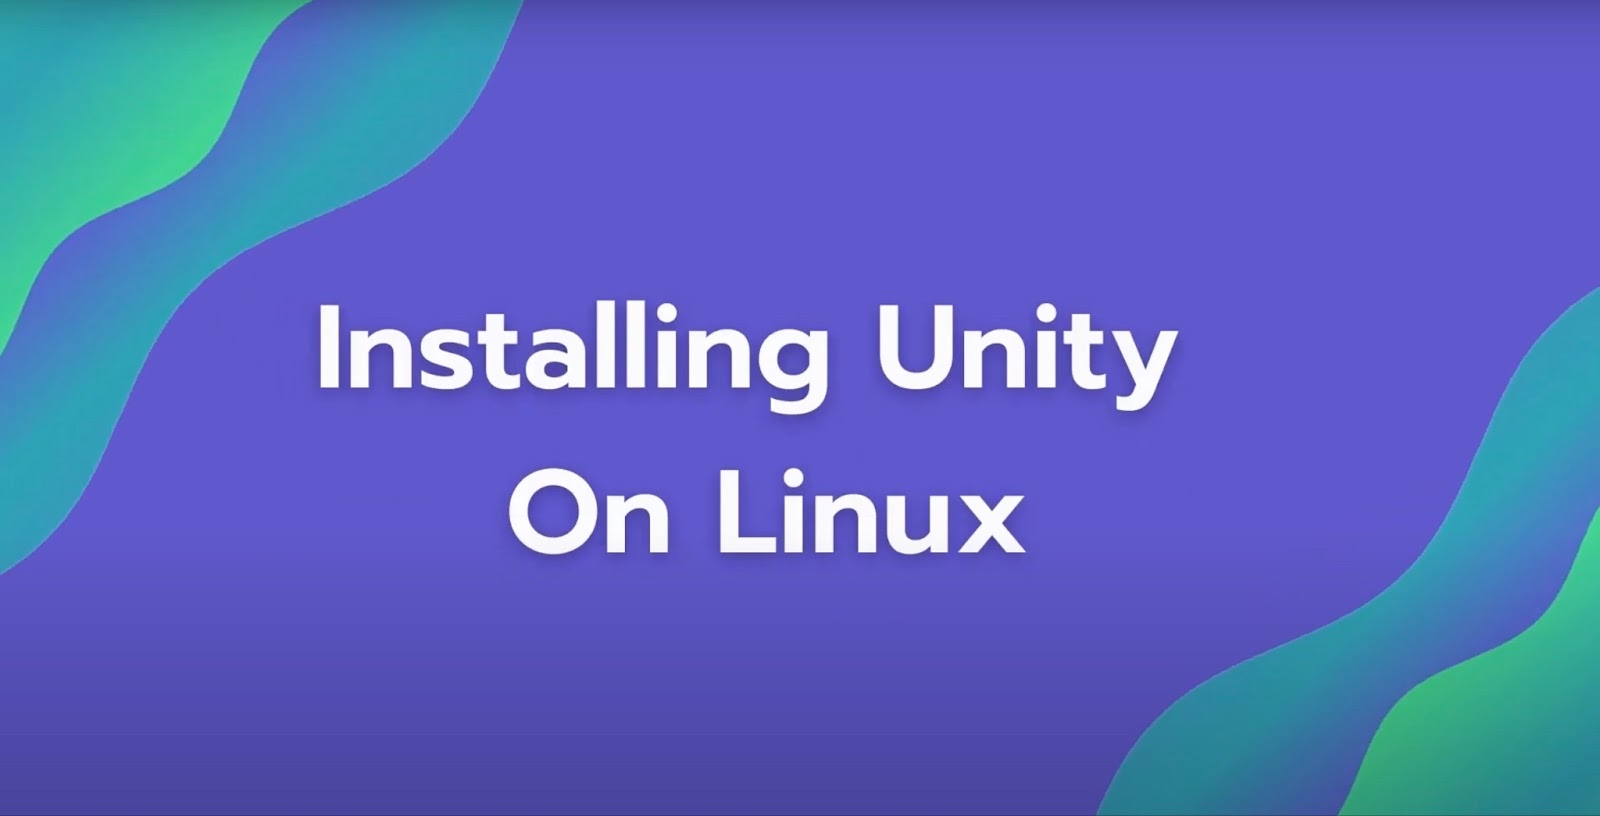 The inscription Installing Unity on Linux on a purple background